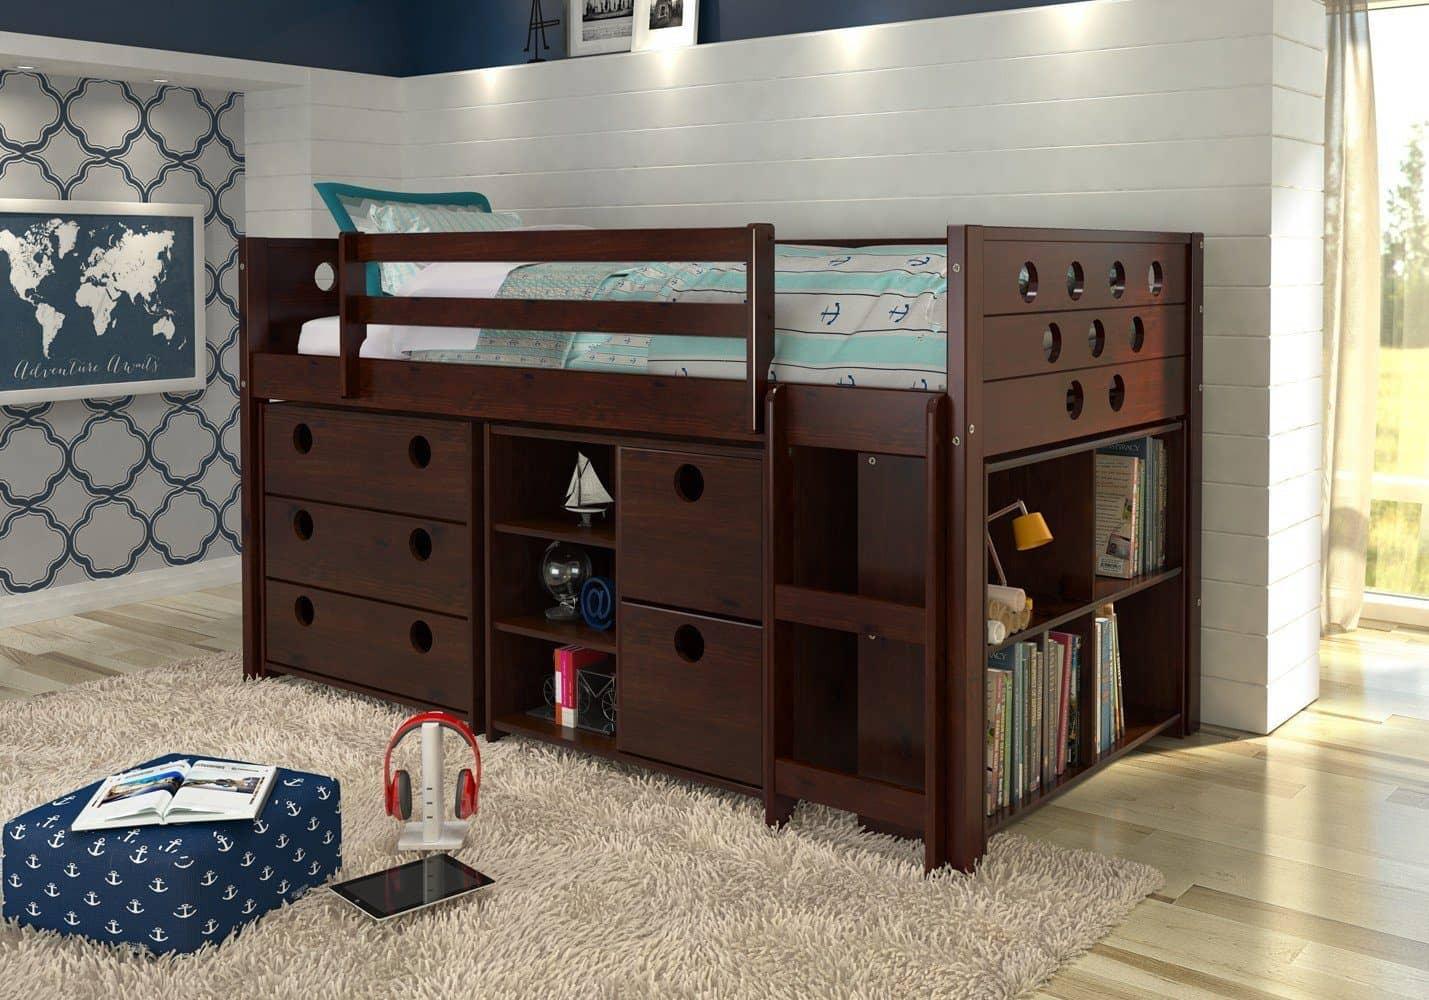 bunk beds with bookshelves